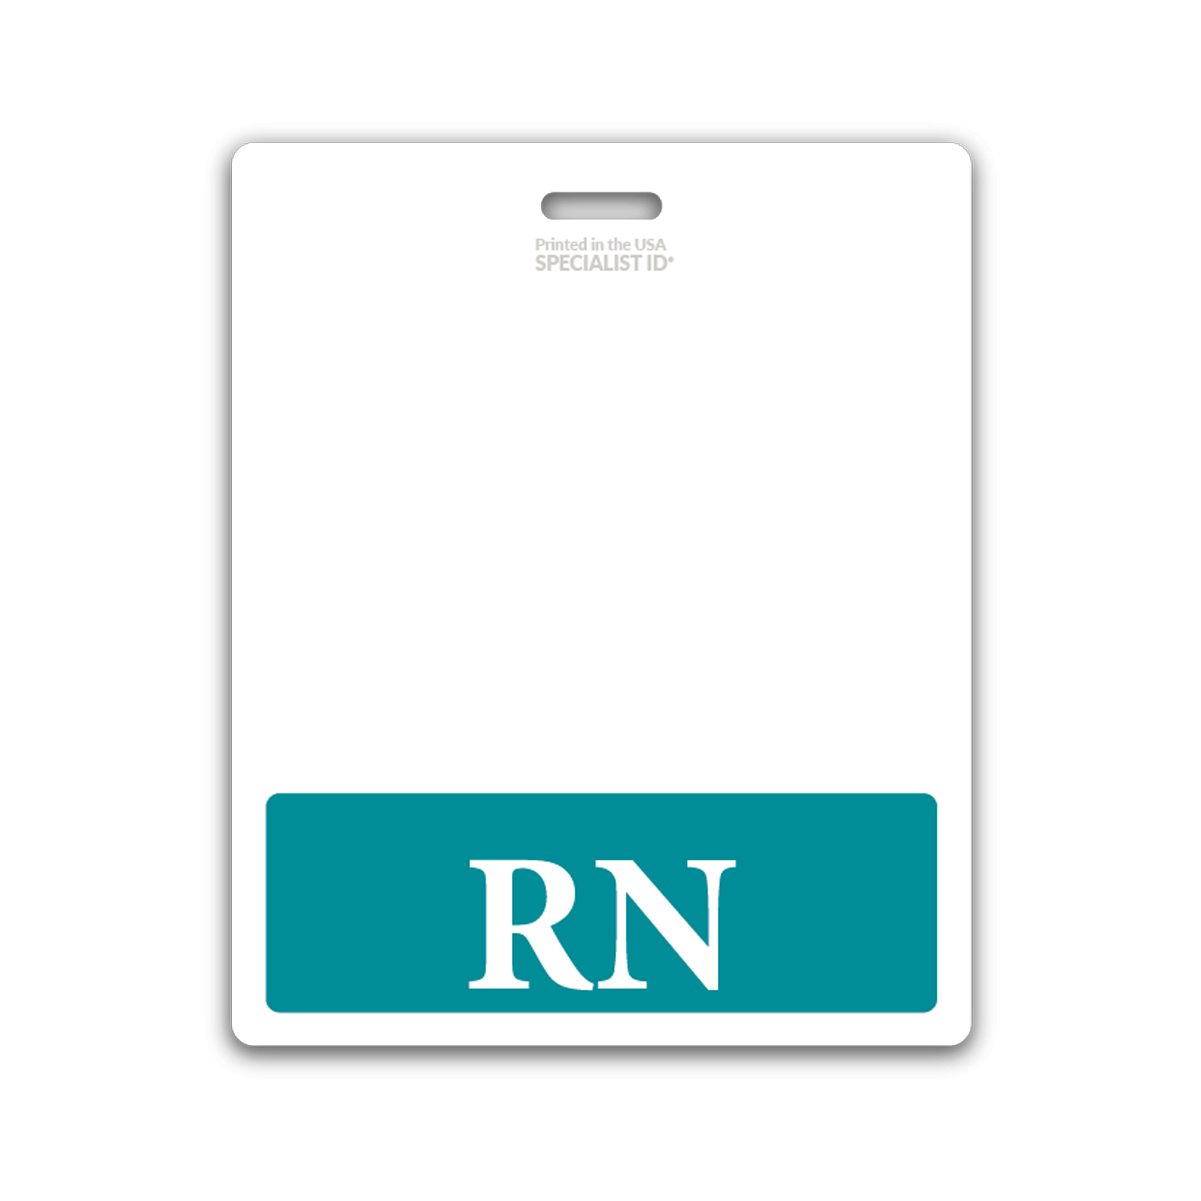 Oversized RN Badge Buddy Horizontal with Teal Border - XL ID Badge Backer for Nurses - Double Sided Print